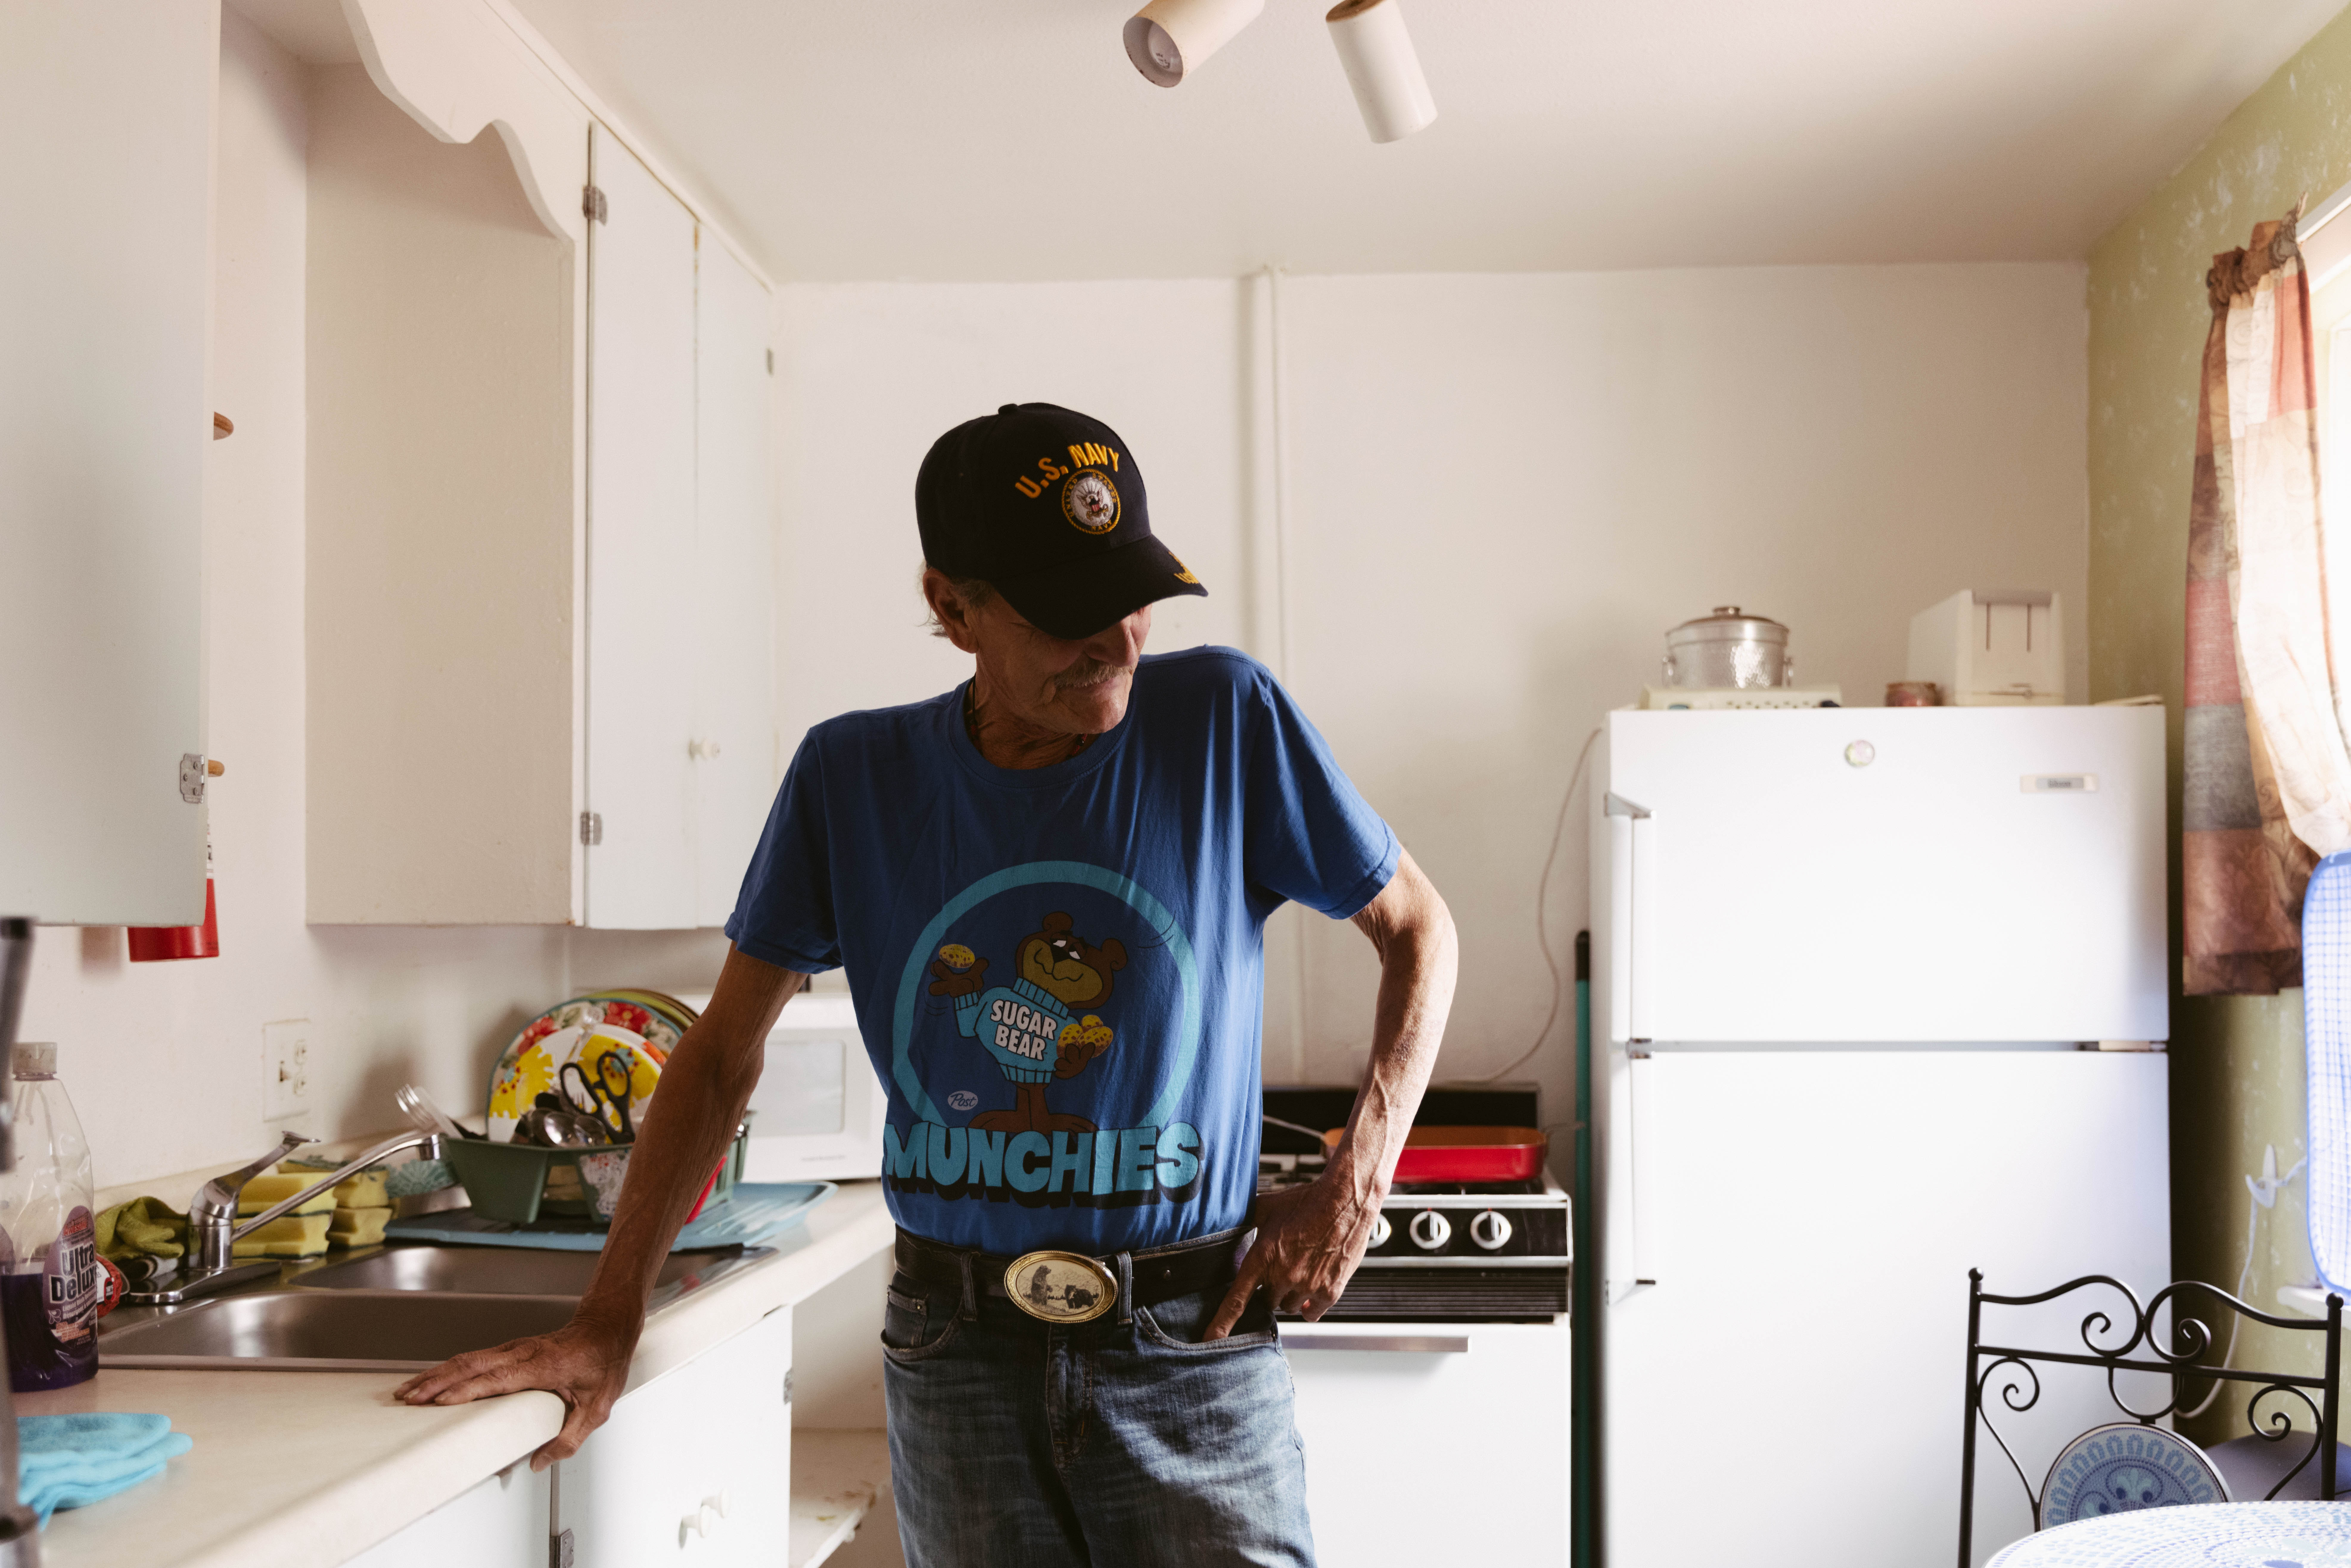 A man standing in a kitchen looking down with a US Navy cap on.